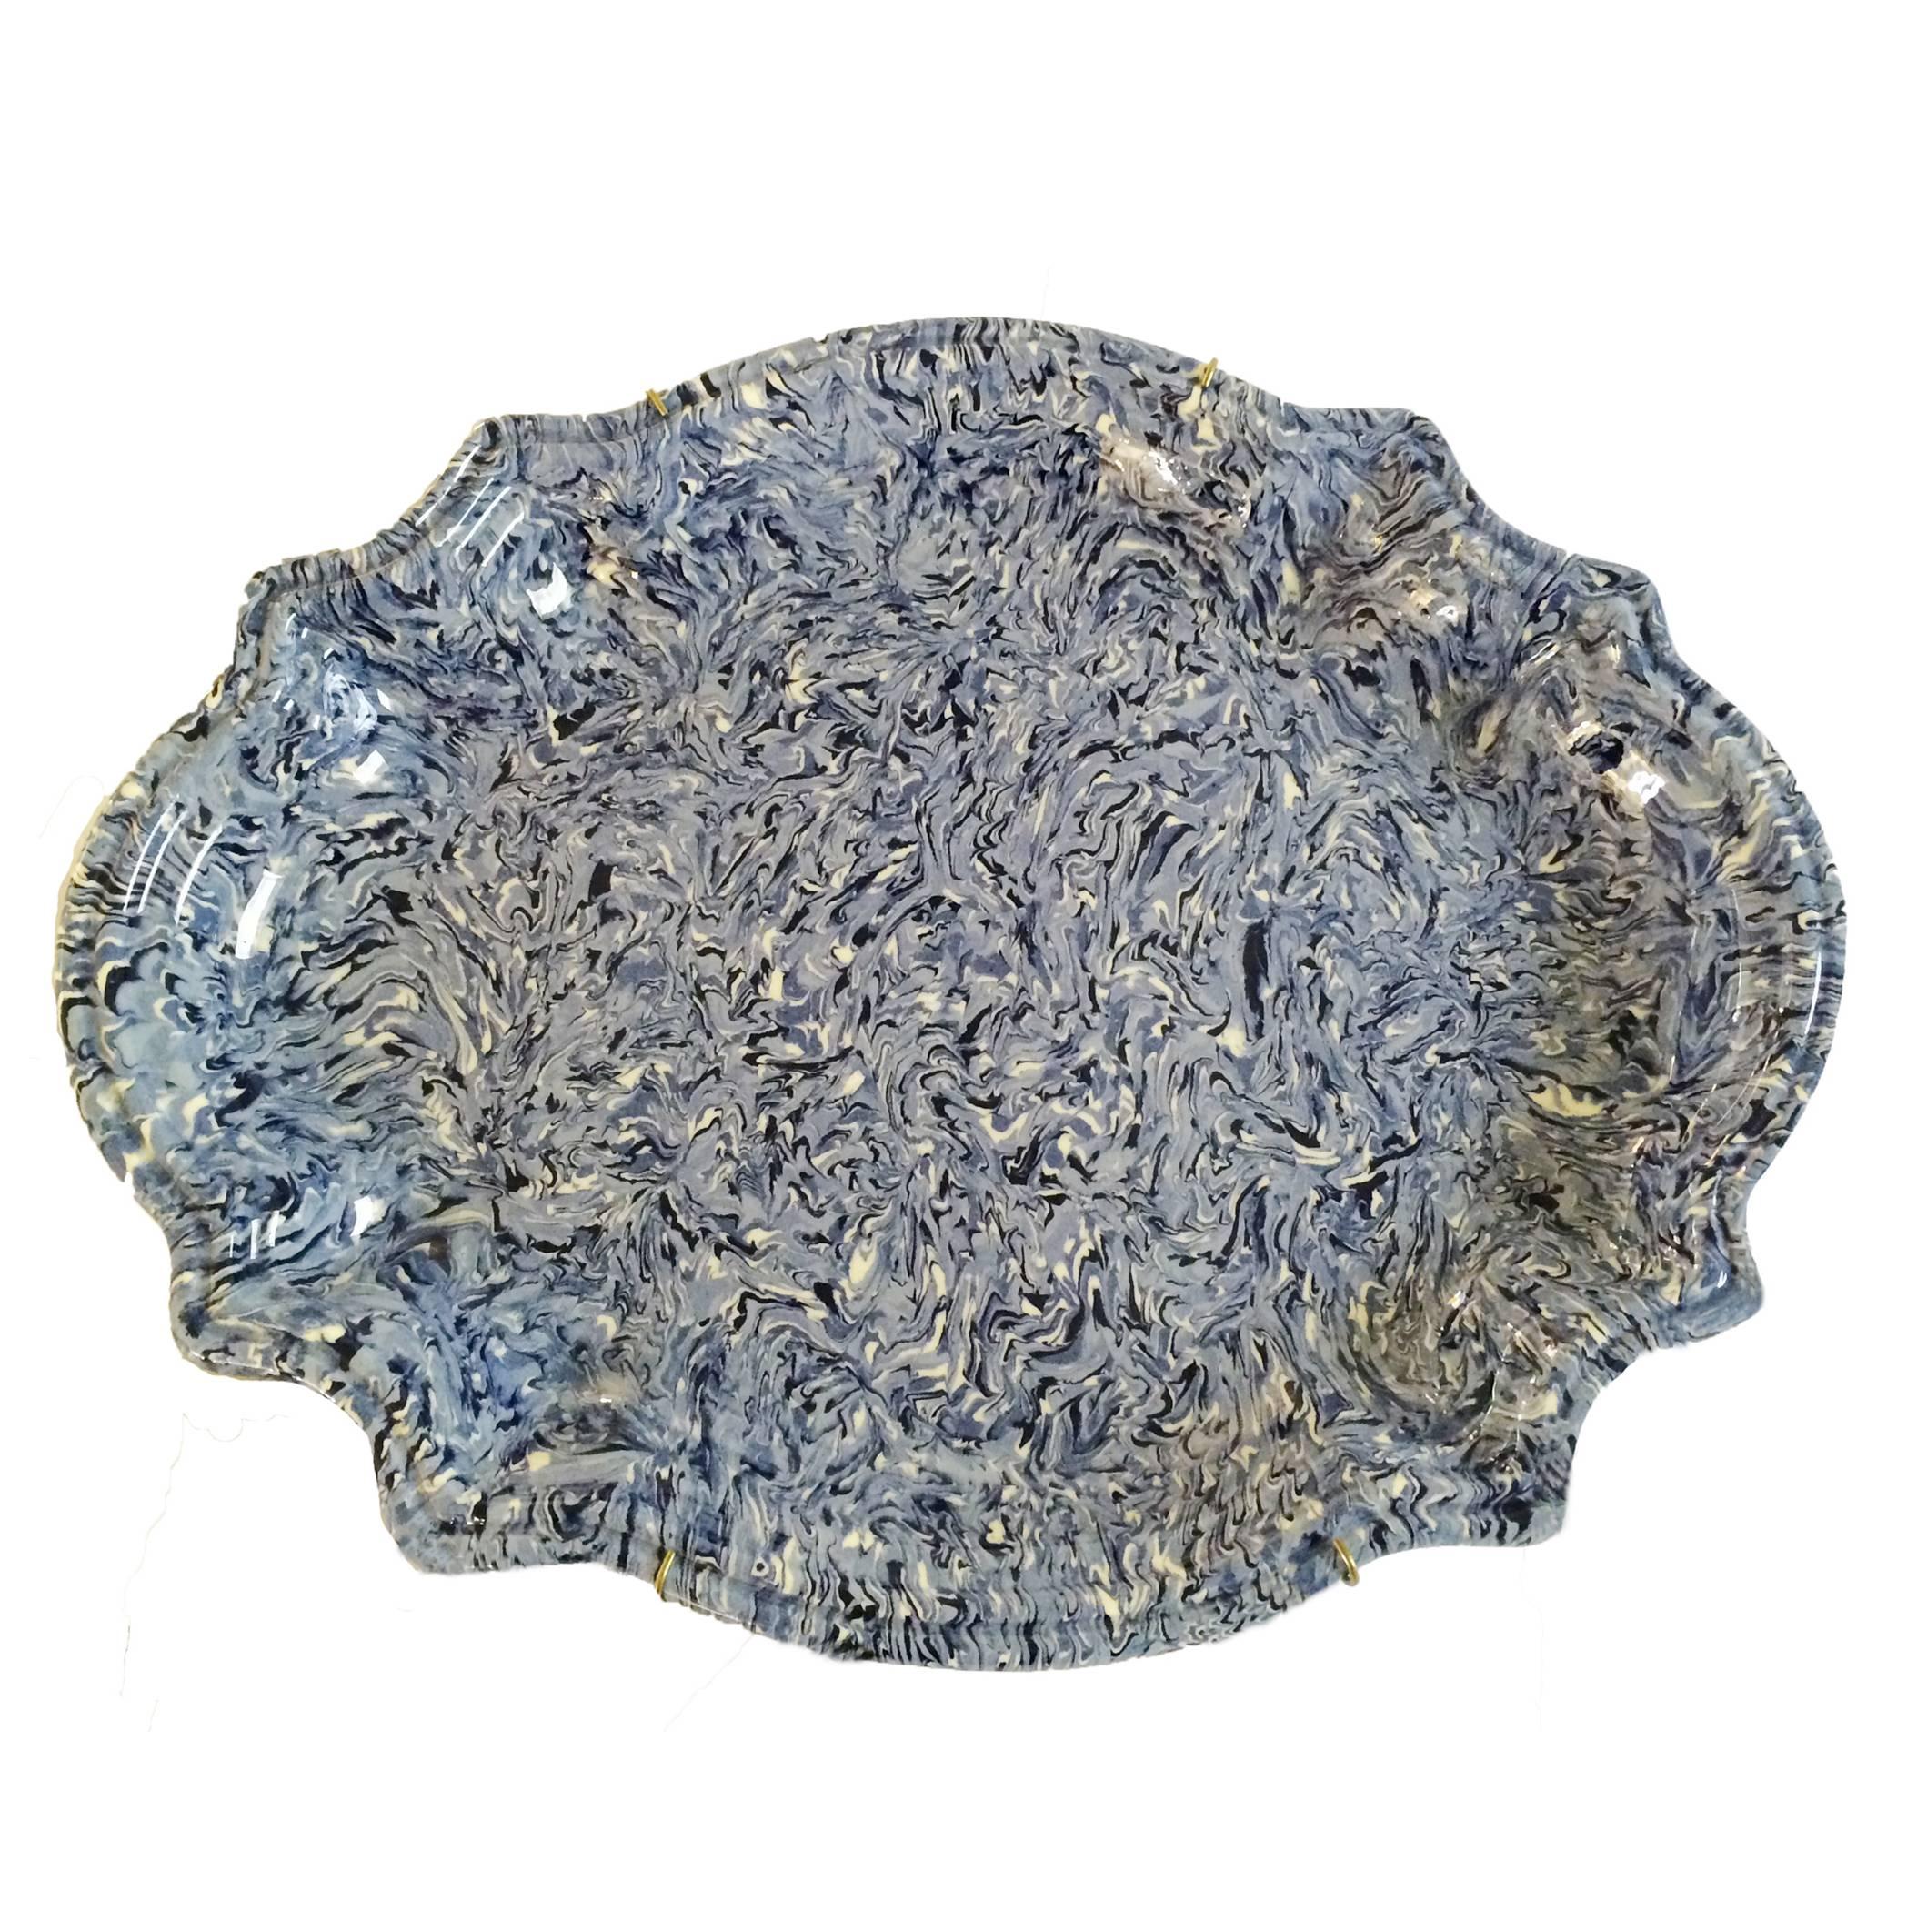 19th century French marbleized oval faience platter from Apt. Mixing a varied range of blues to create a sumptuous pattern with a beautifully scalloped rim.